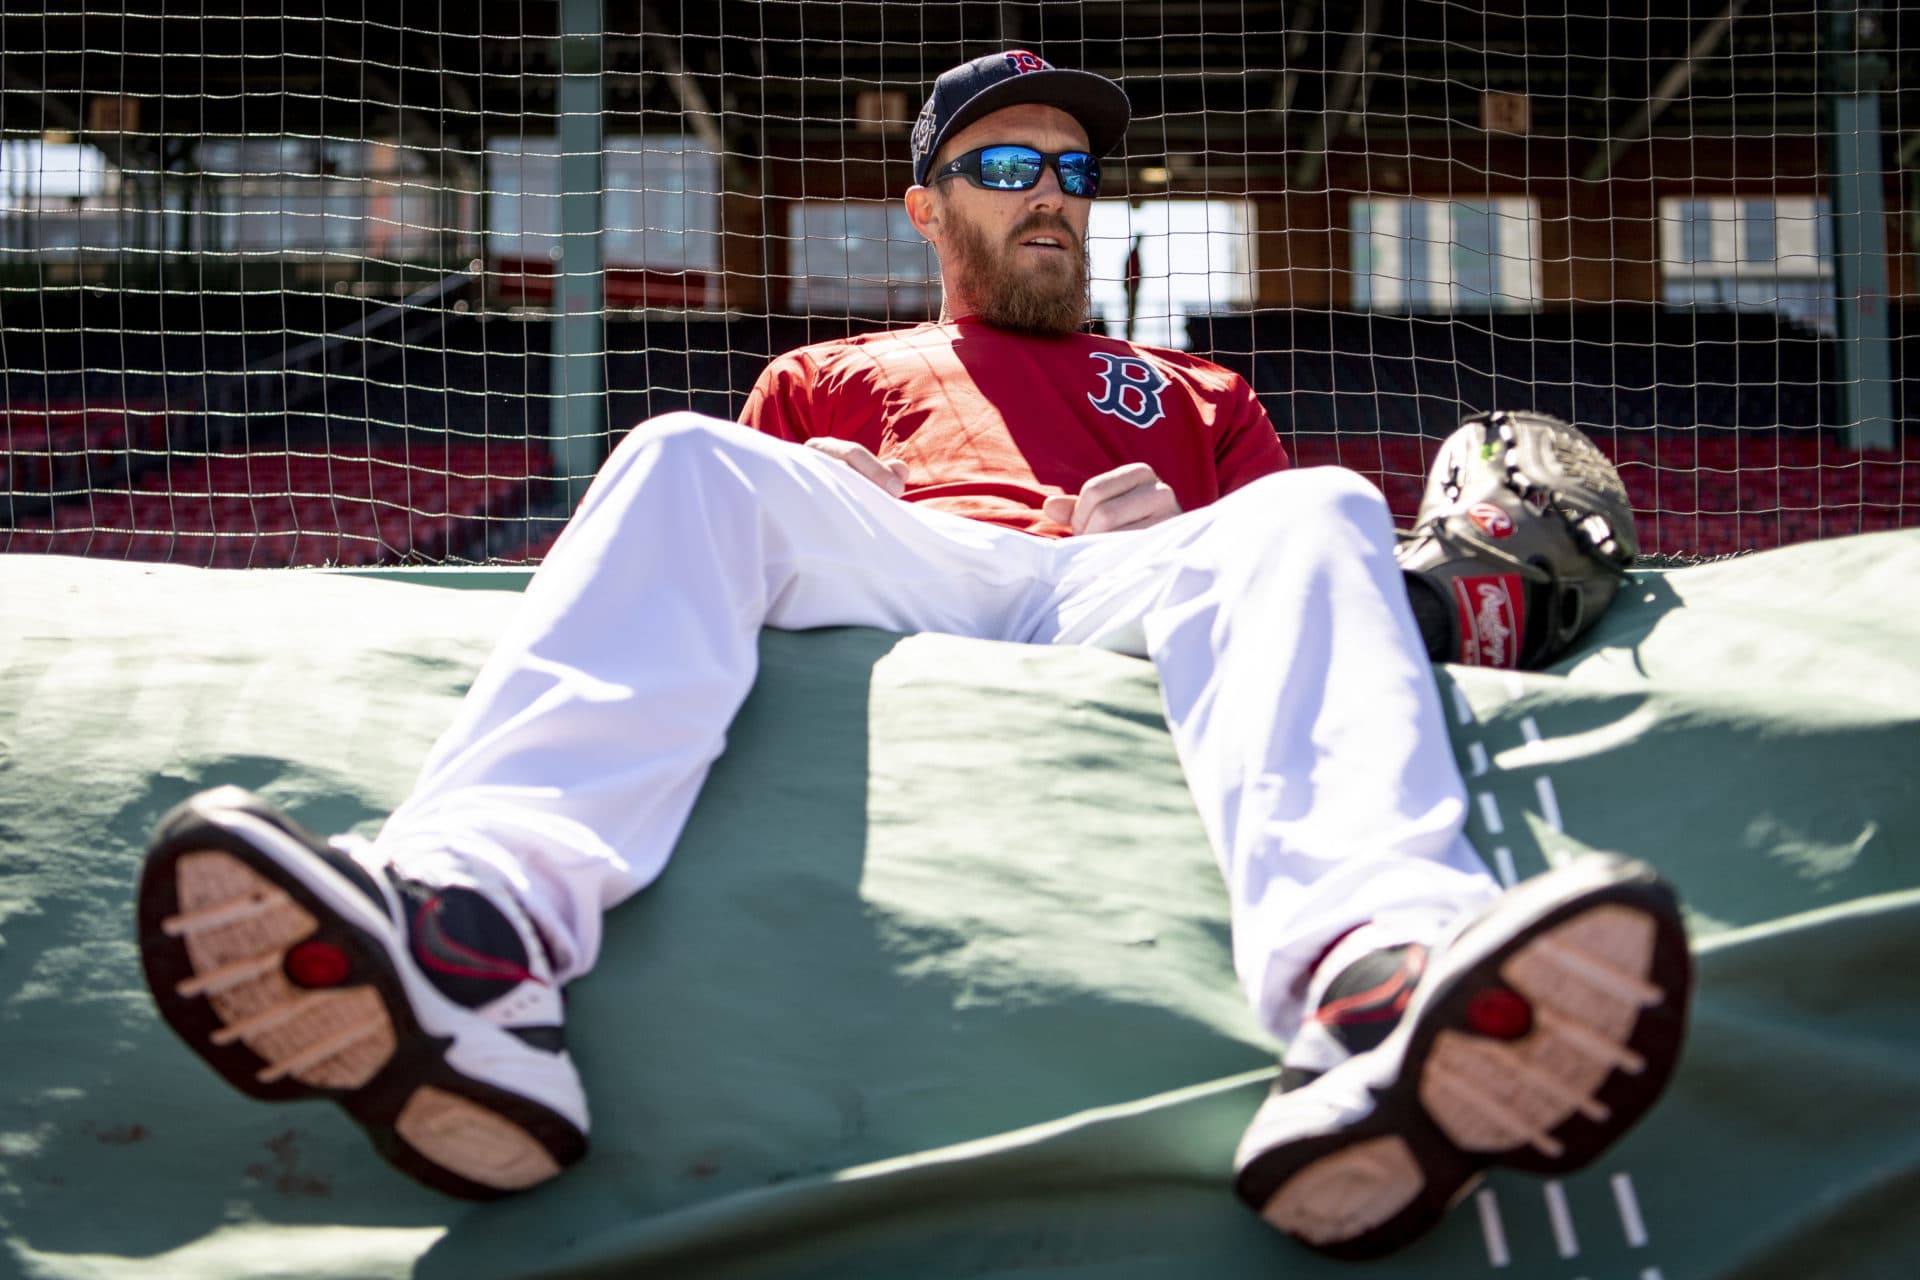 Jake Diekman of the Boston Red Sox lounges before the team's opening day game against the Minnesota Twins. (Maddie Malhotra/Boston Red Sox/Getty Images)